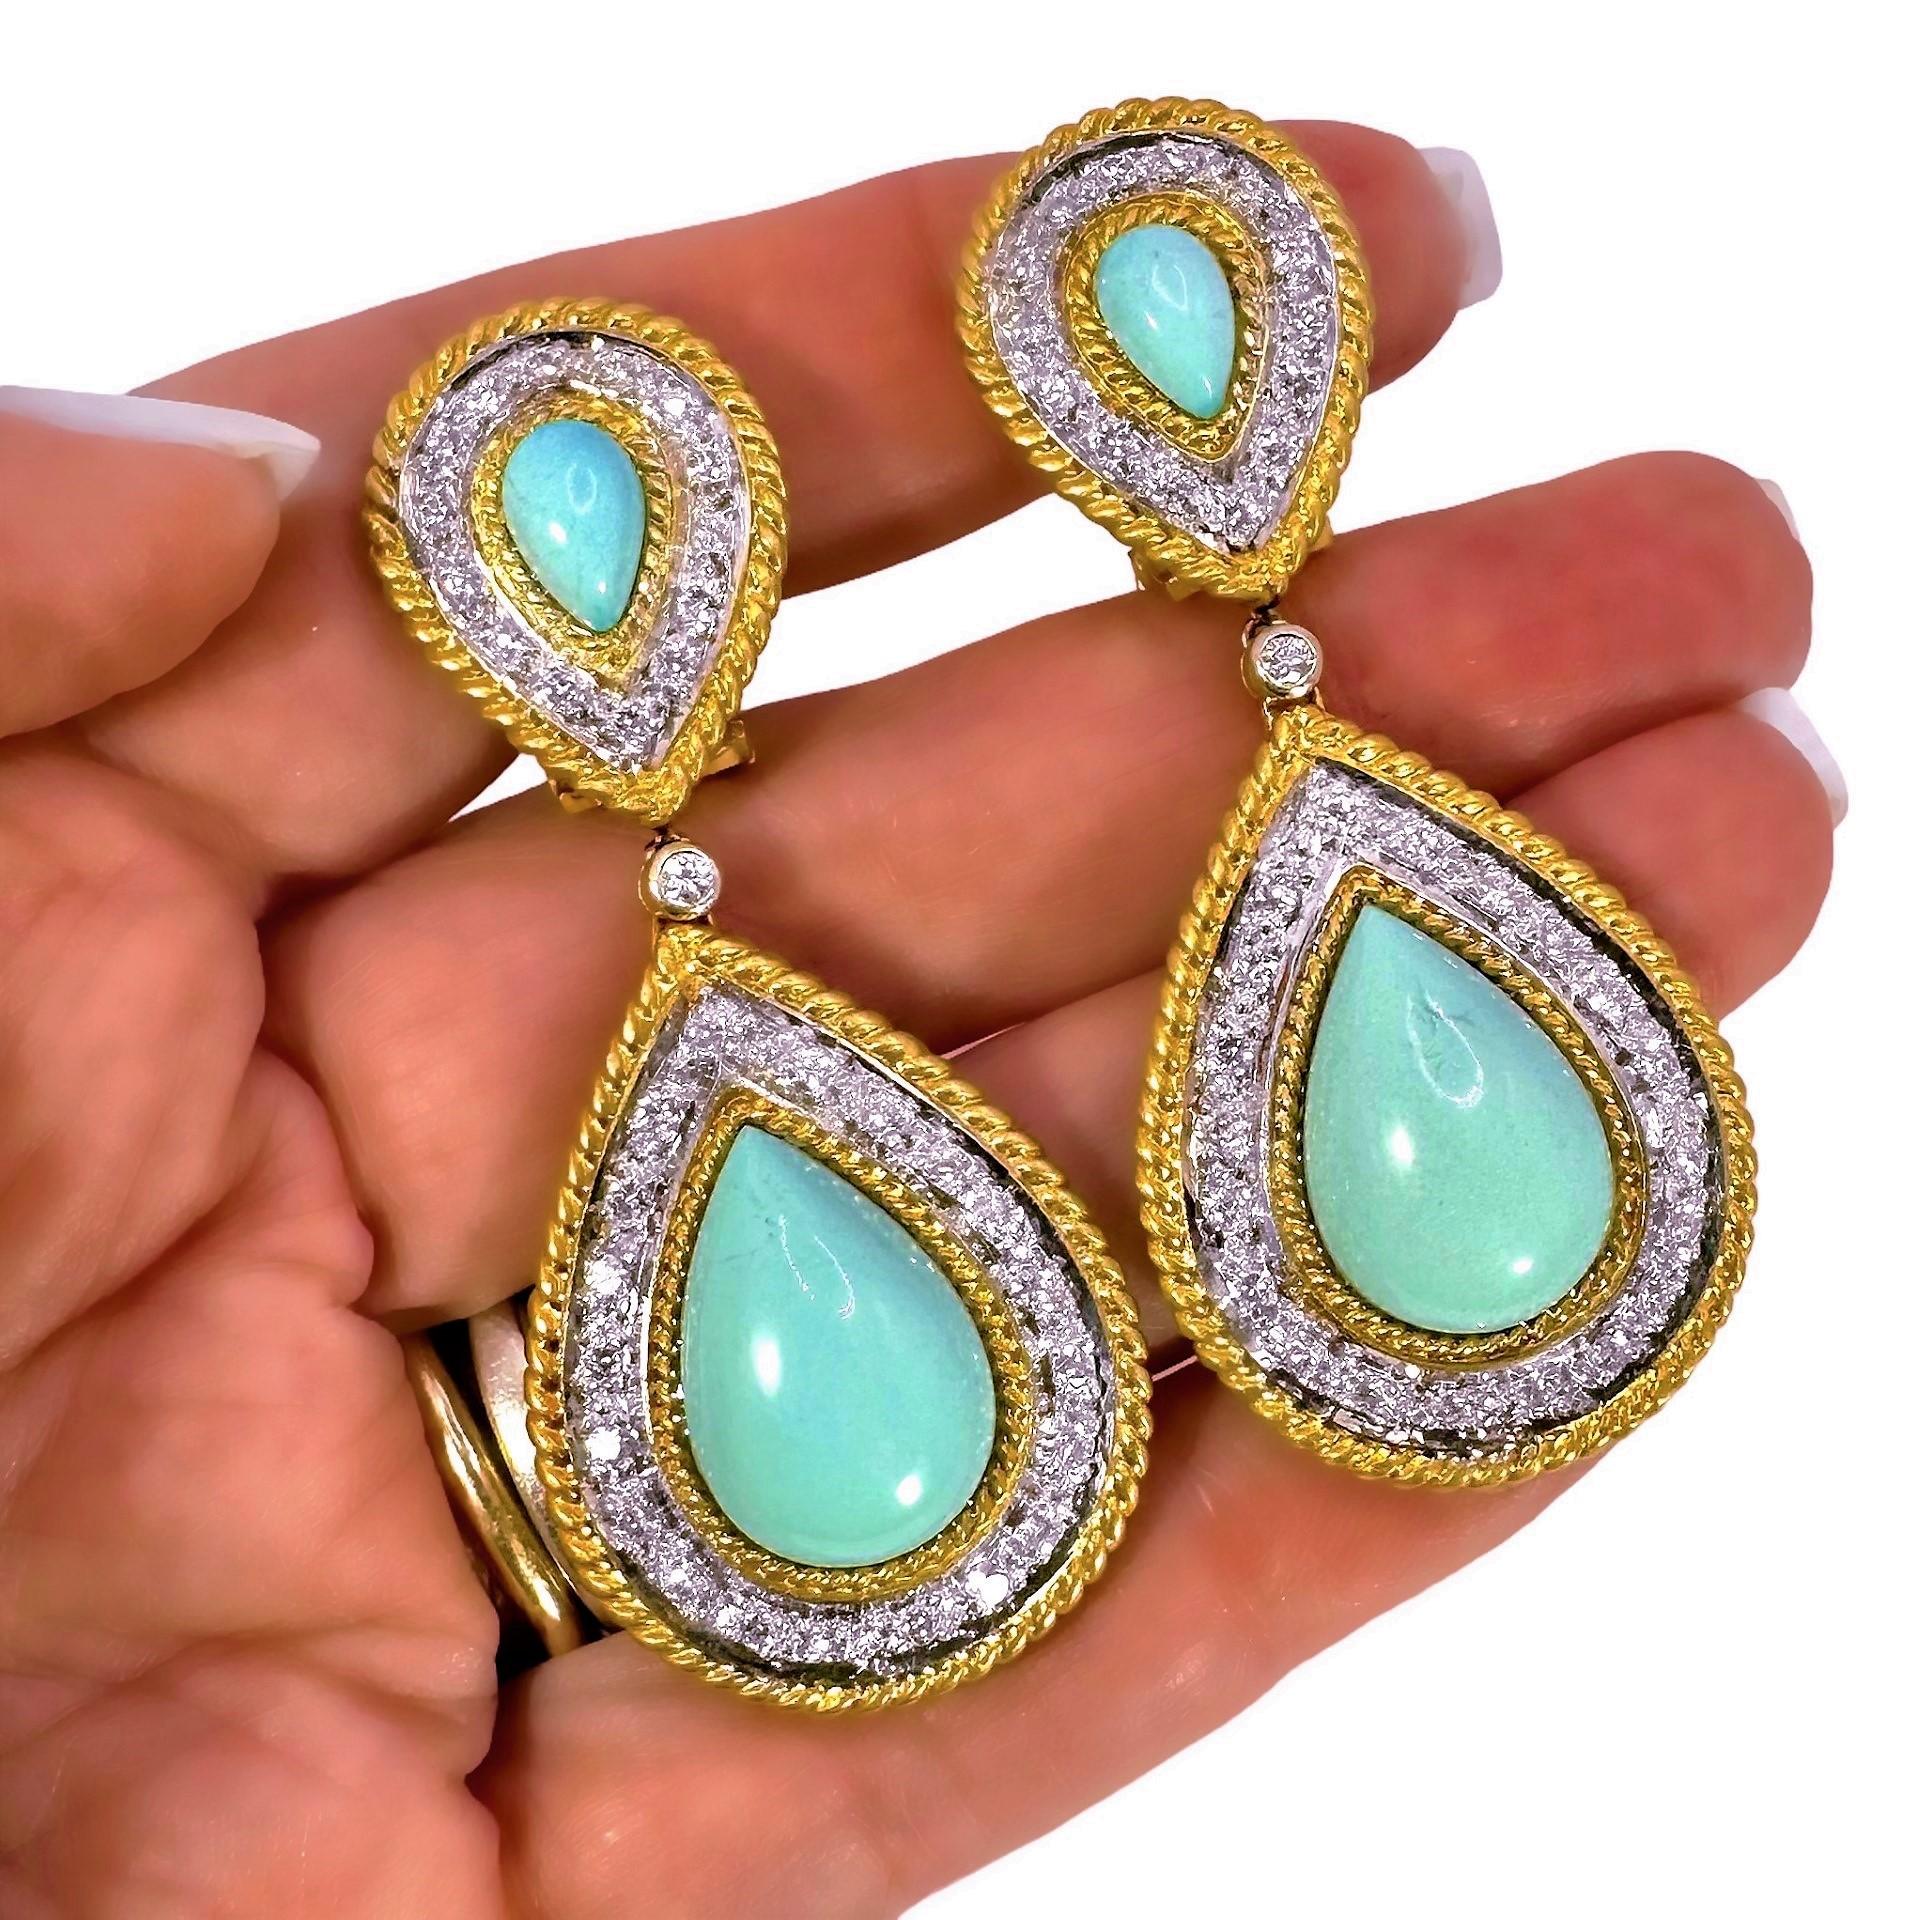 Women's Elegant Vintage 18k Yellow Gold, Diamond and Persian Turquoise Earrings For Sale